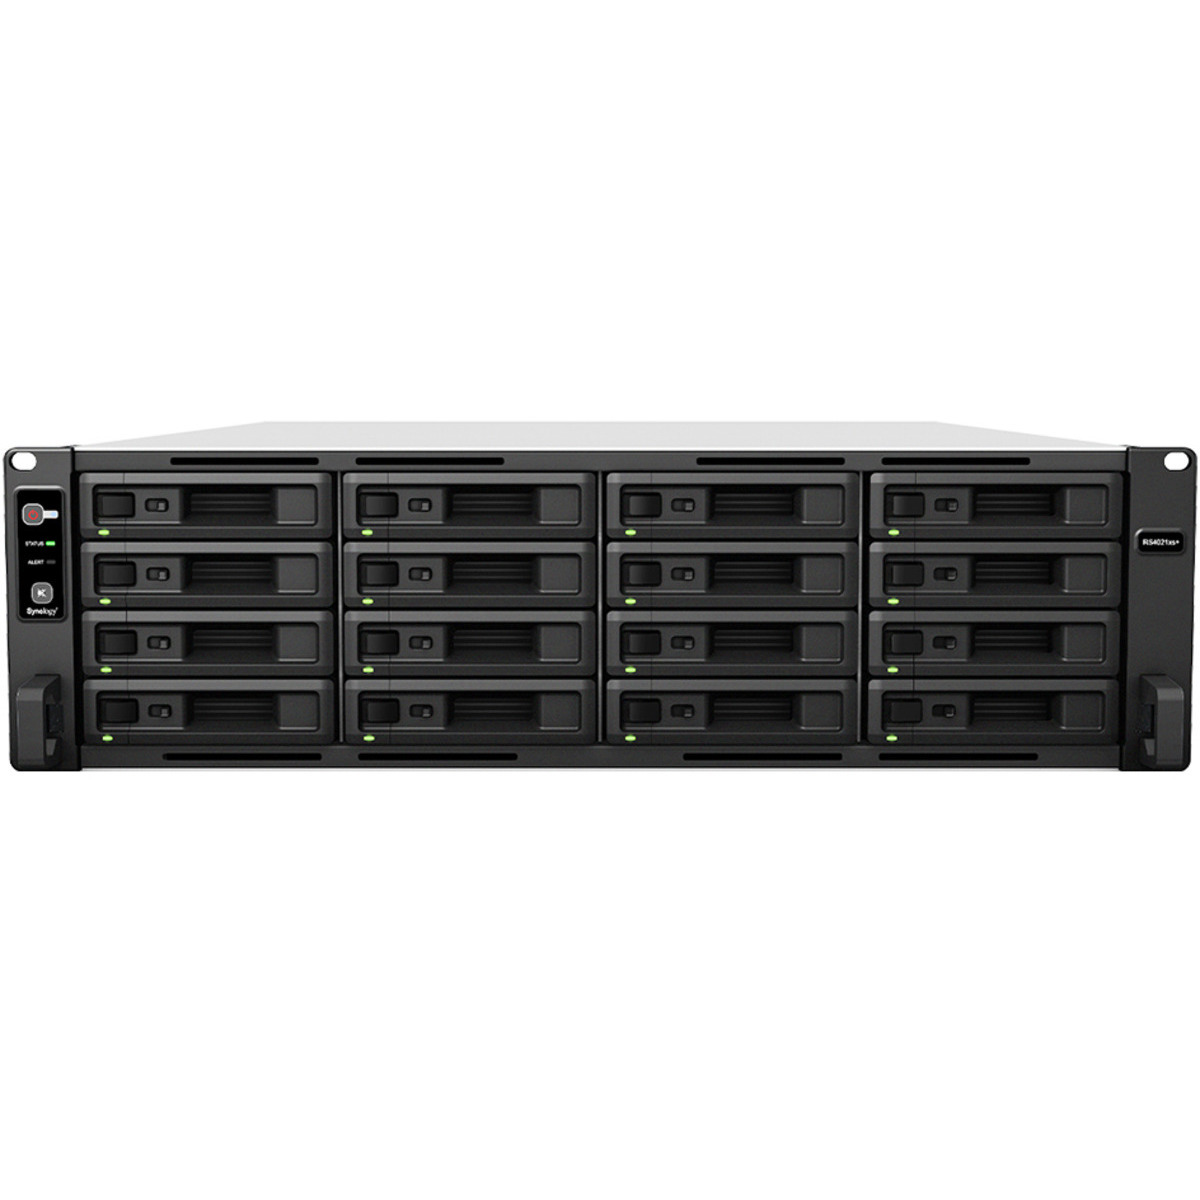 Synology RackStation RS4021xs+ 40tb 16-Bay RackMount Large Business / Enterprise NAS - Network Attached Storage Device 10x4tb Synology Plus Series HAT3300-4T 3.5 5400rmp SATA 6Gb/s HDD NAS Class Drives Installed - Burn-In Tested RackStation RS4021xs+